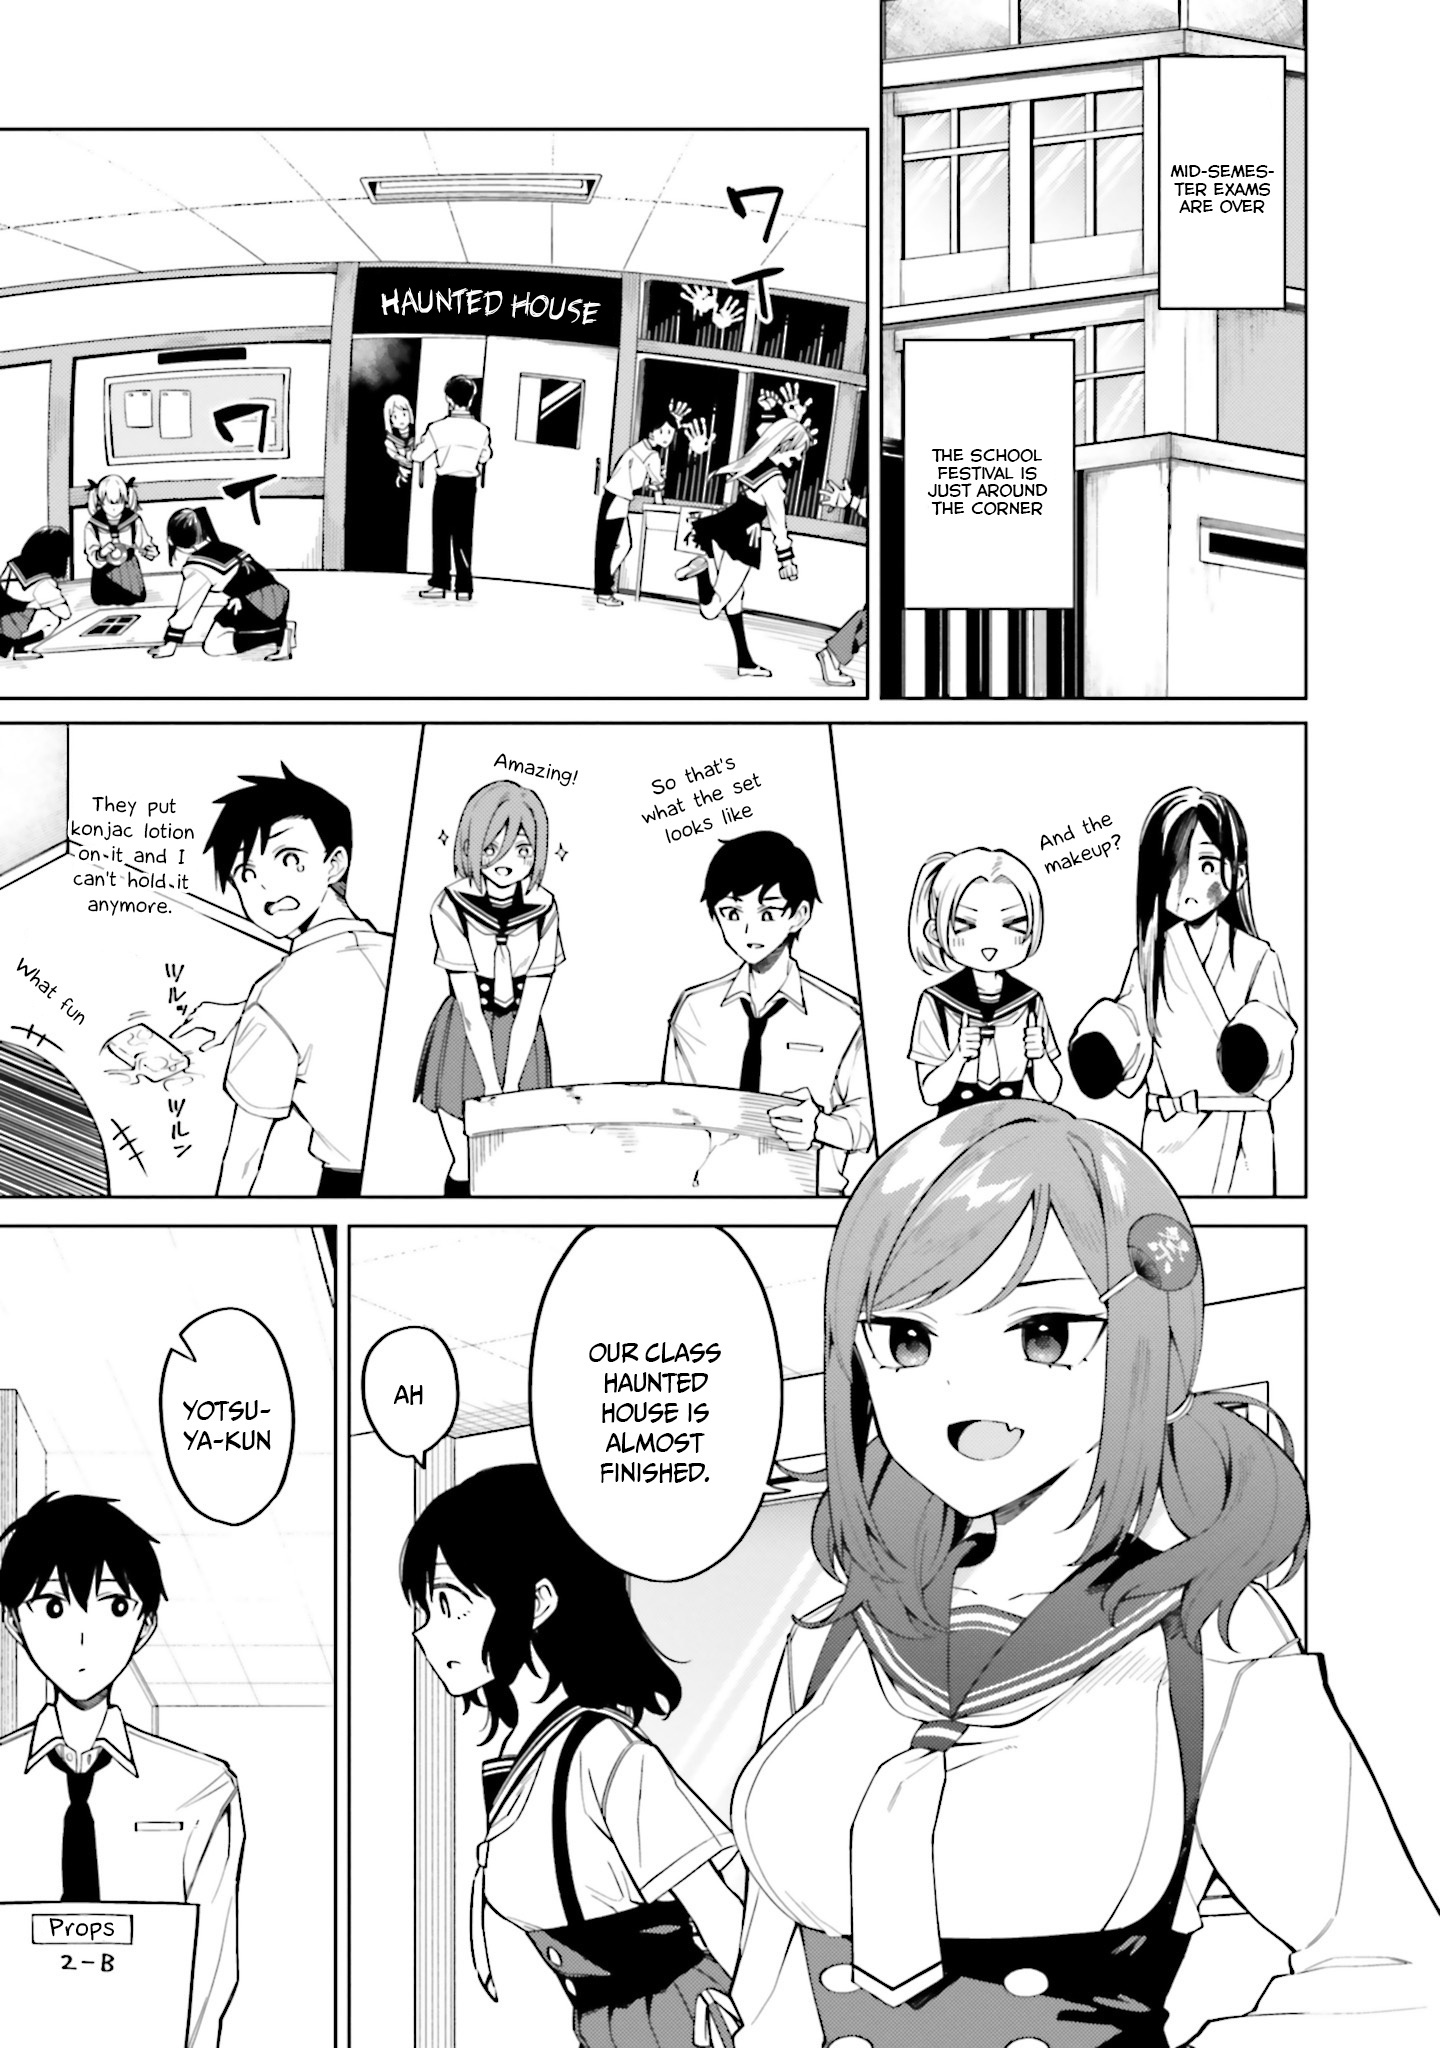 I Don't Understand Shirogane-San's Facial Expression At All - Page 2